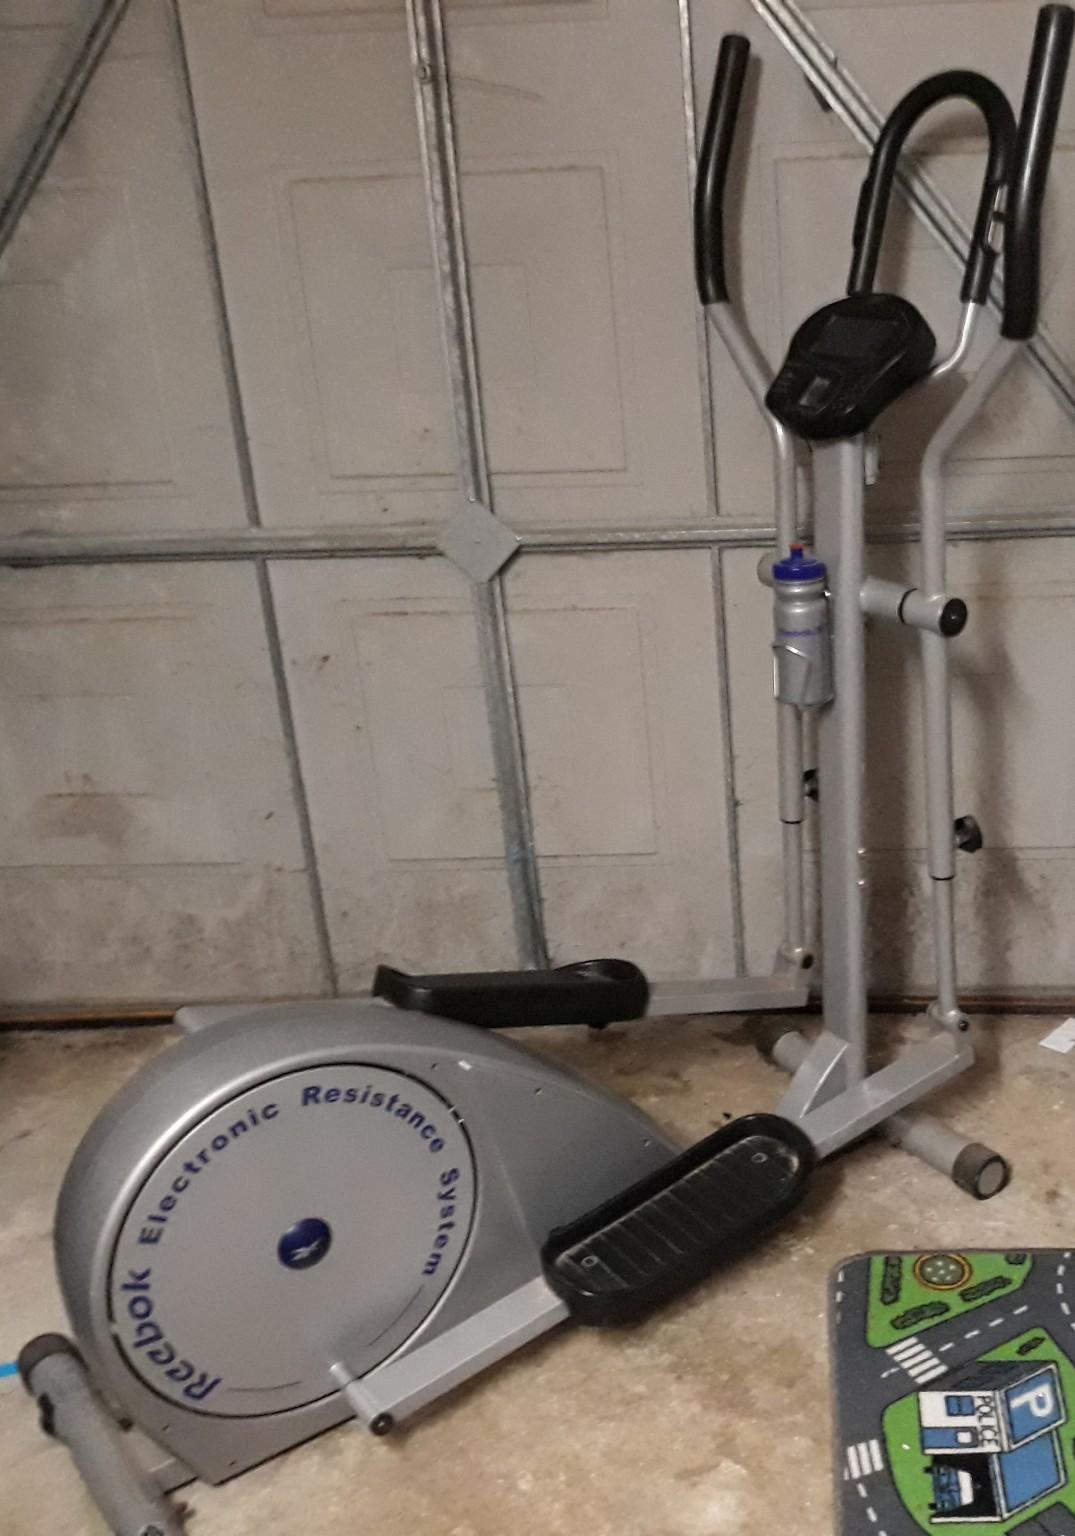 RE3000 Cross Trainer in MK15 Park for £25.00 sale | Shpock